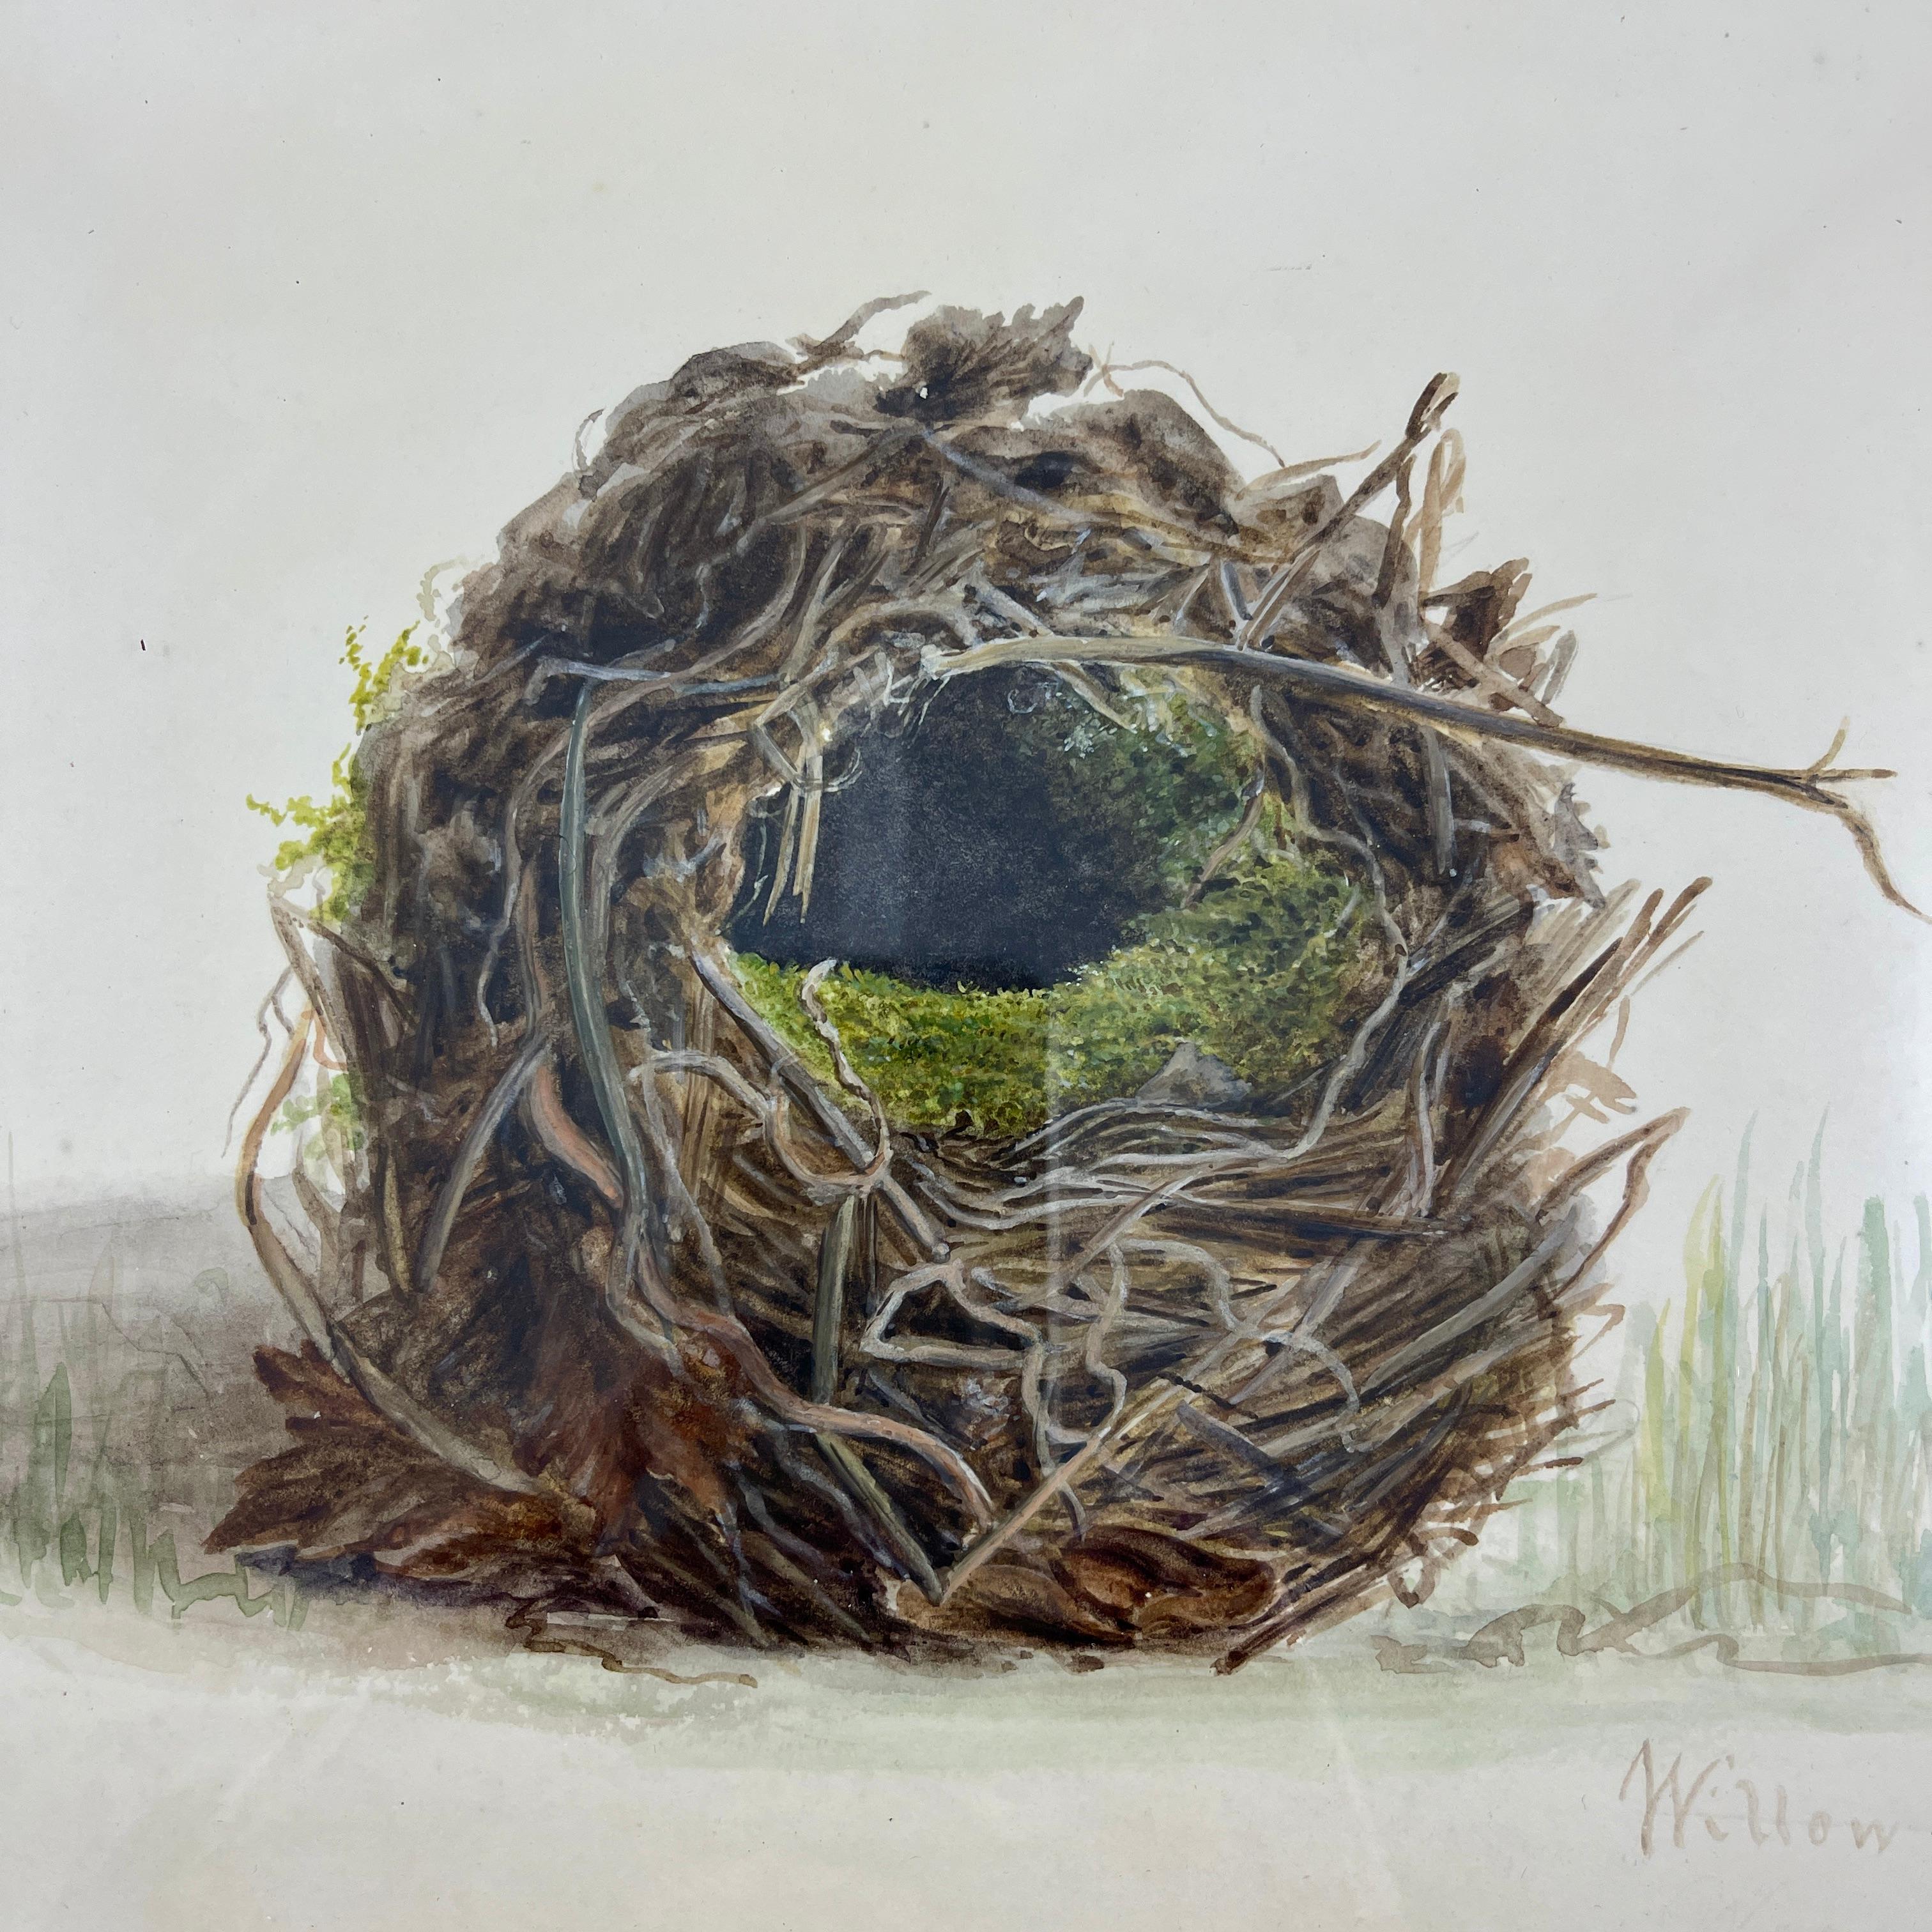 An original British School Regency Period watercolor study of a Willow Wren’s nest and egg, mounted in a Georgian Period fruitwood frame – Dated 1863.

These watercolors were largely painted by young girls from aristocratic families during the